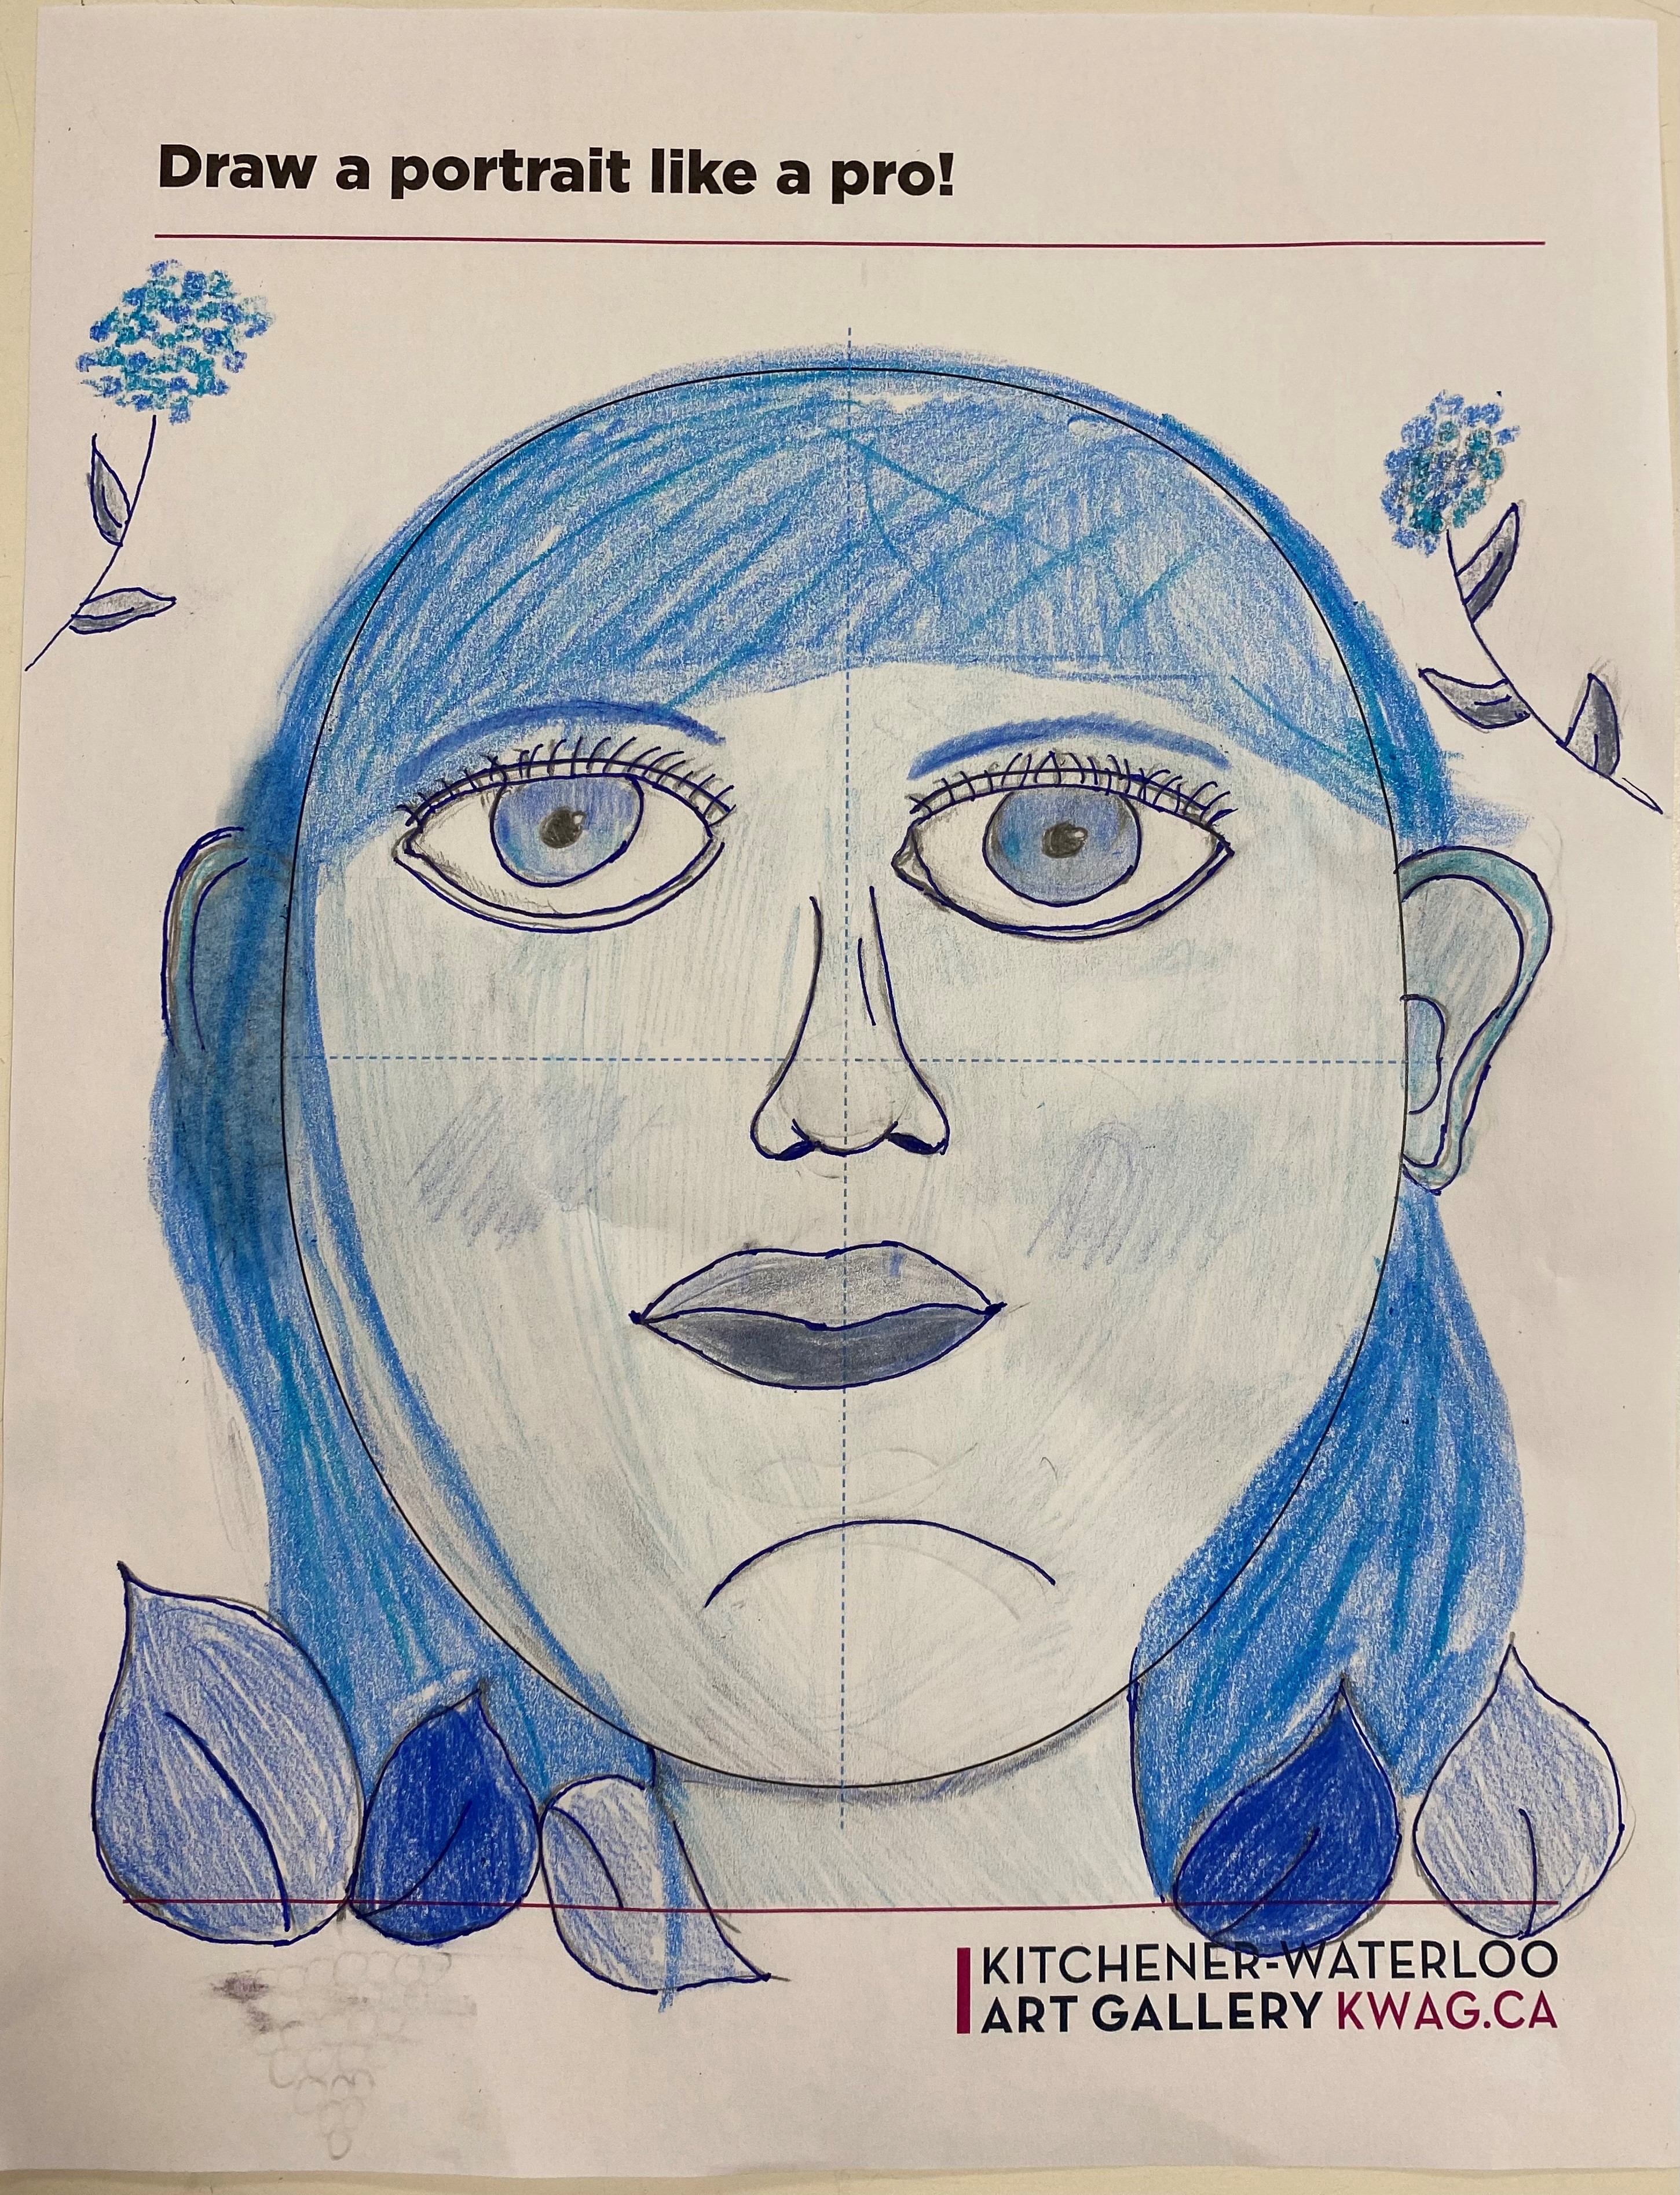 A KWAG activity sheet entitled "Draw a portraits like a pro!" filled with an expressive female portrait in blue tones surrounded by flowers